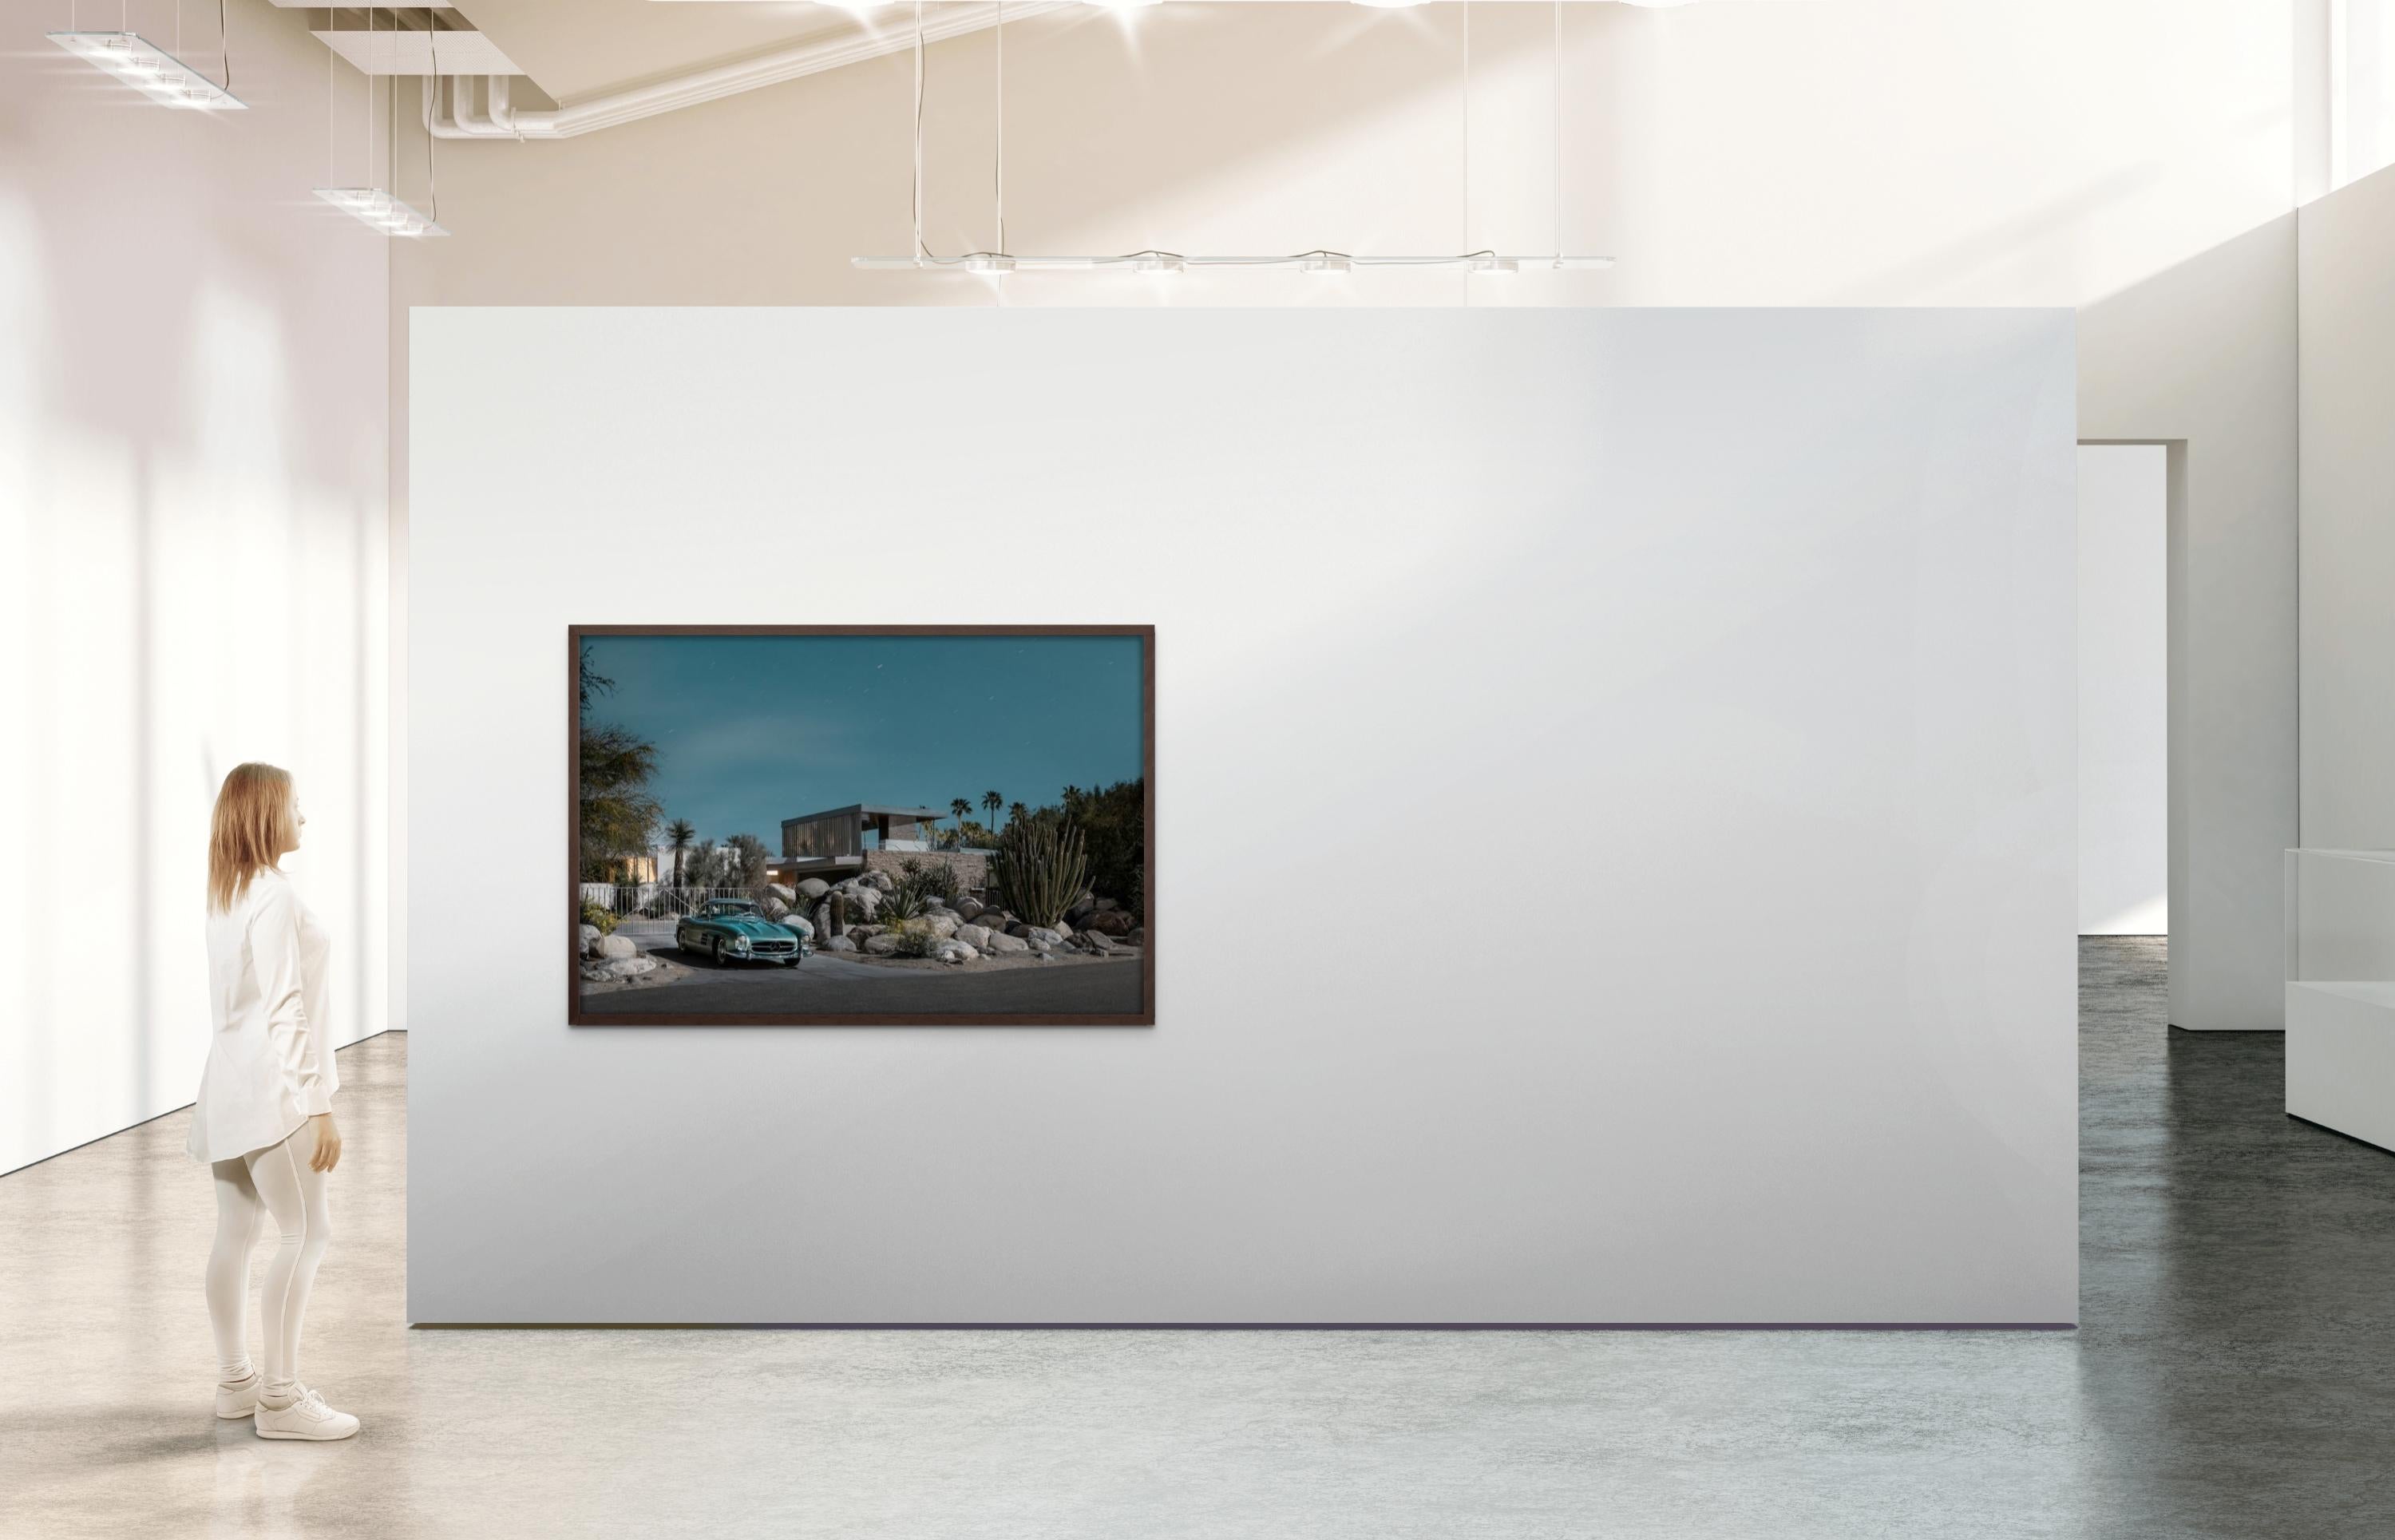 Palm Springs Mid Century Modern Architecture, Vintage Classic Mercedes Benz SL, Palm Desert, Limited Series. 

Archival Inkjet Print on Cotton Paper. Mid Century Modern Architecture Design. Tom Blachford, Palm Springs California.

This is a limited